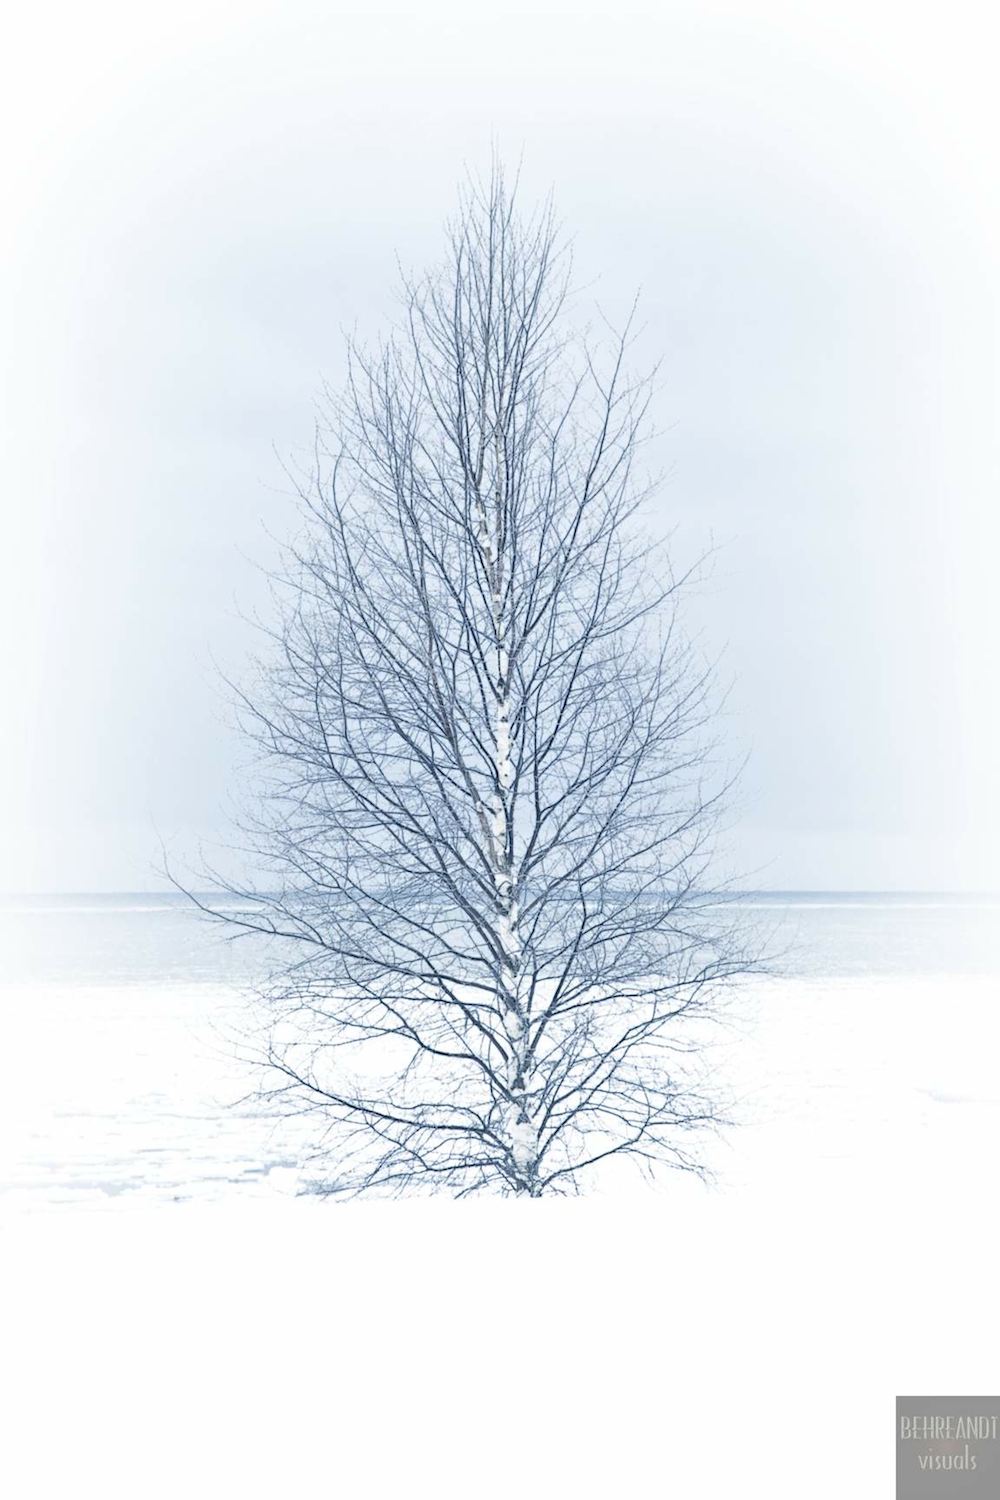 A birch tree stands along the cold shore of Lake Michigan